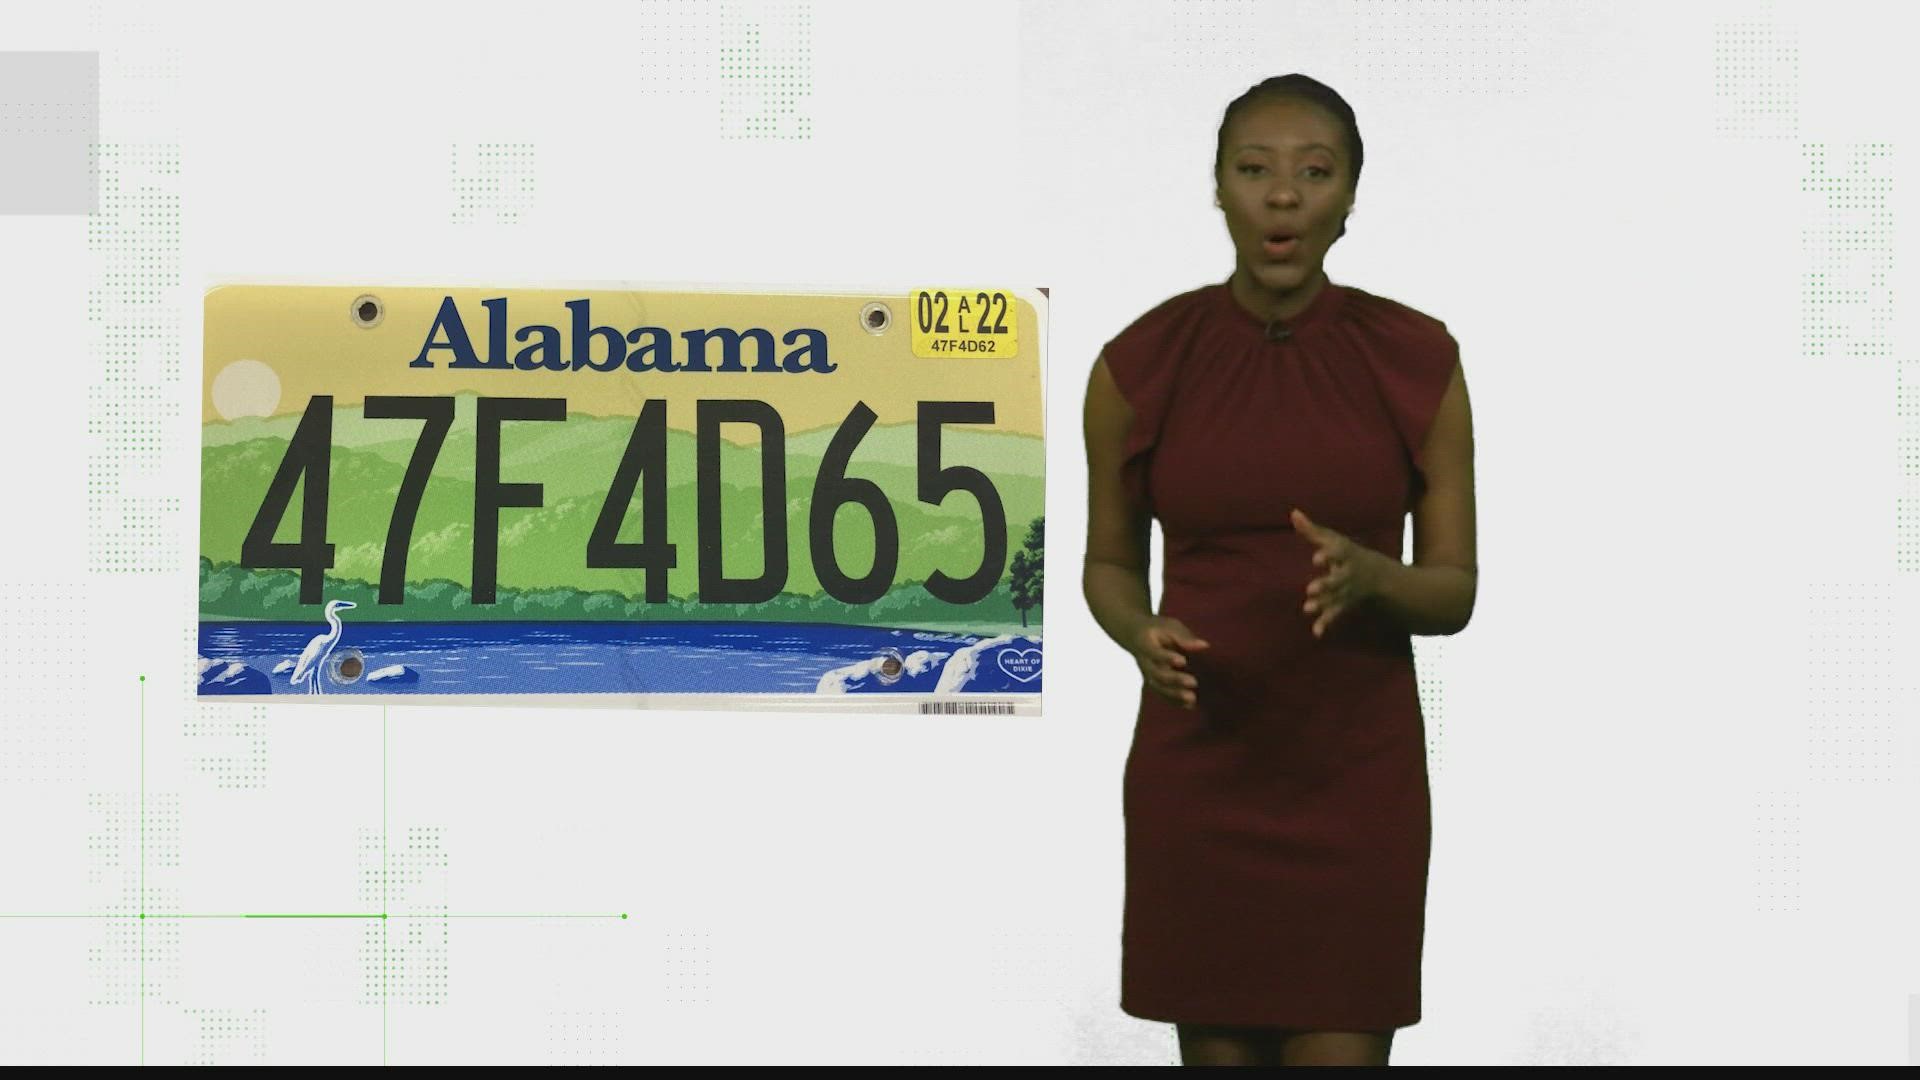 A social media user had questions about renewing their license tag.